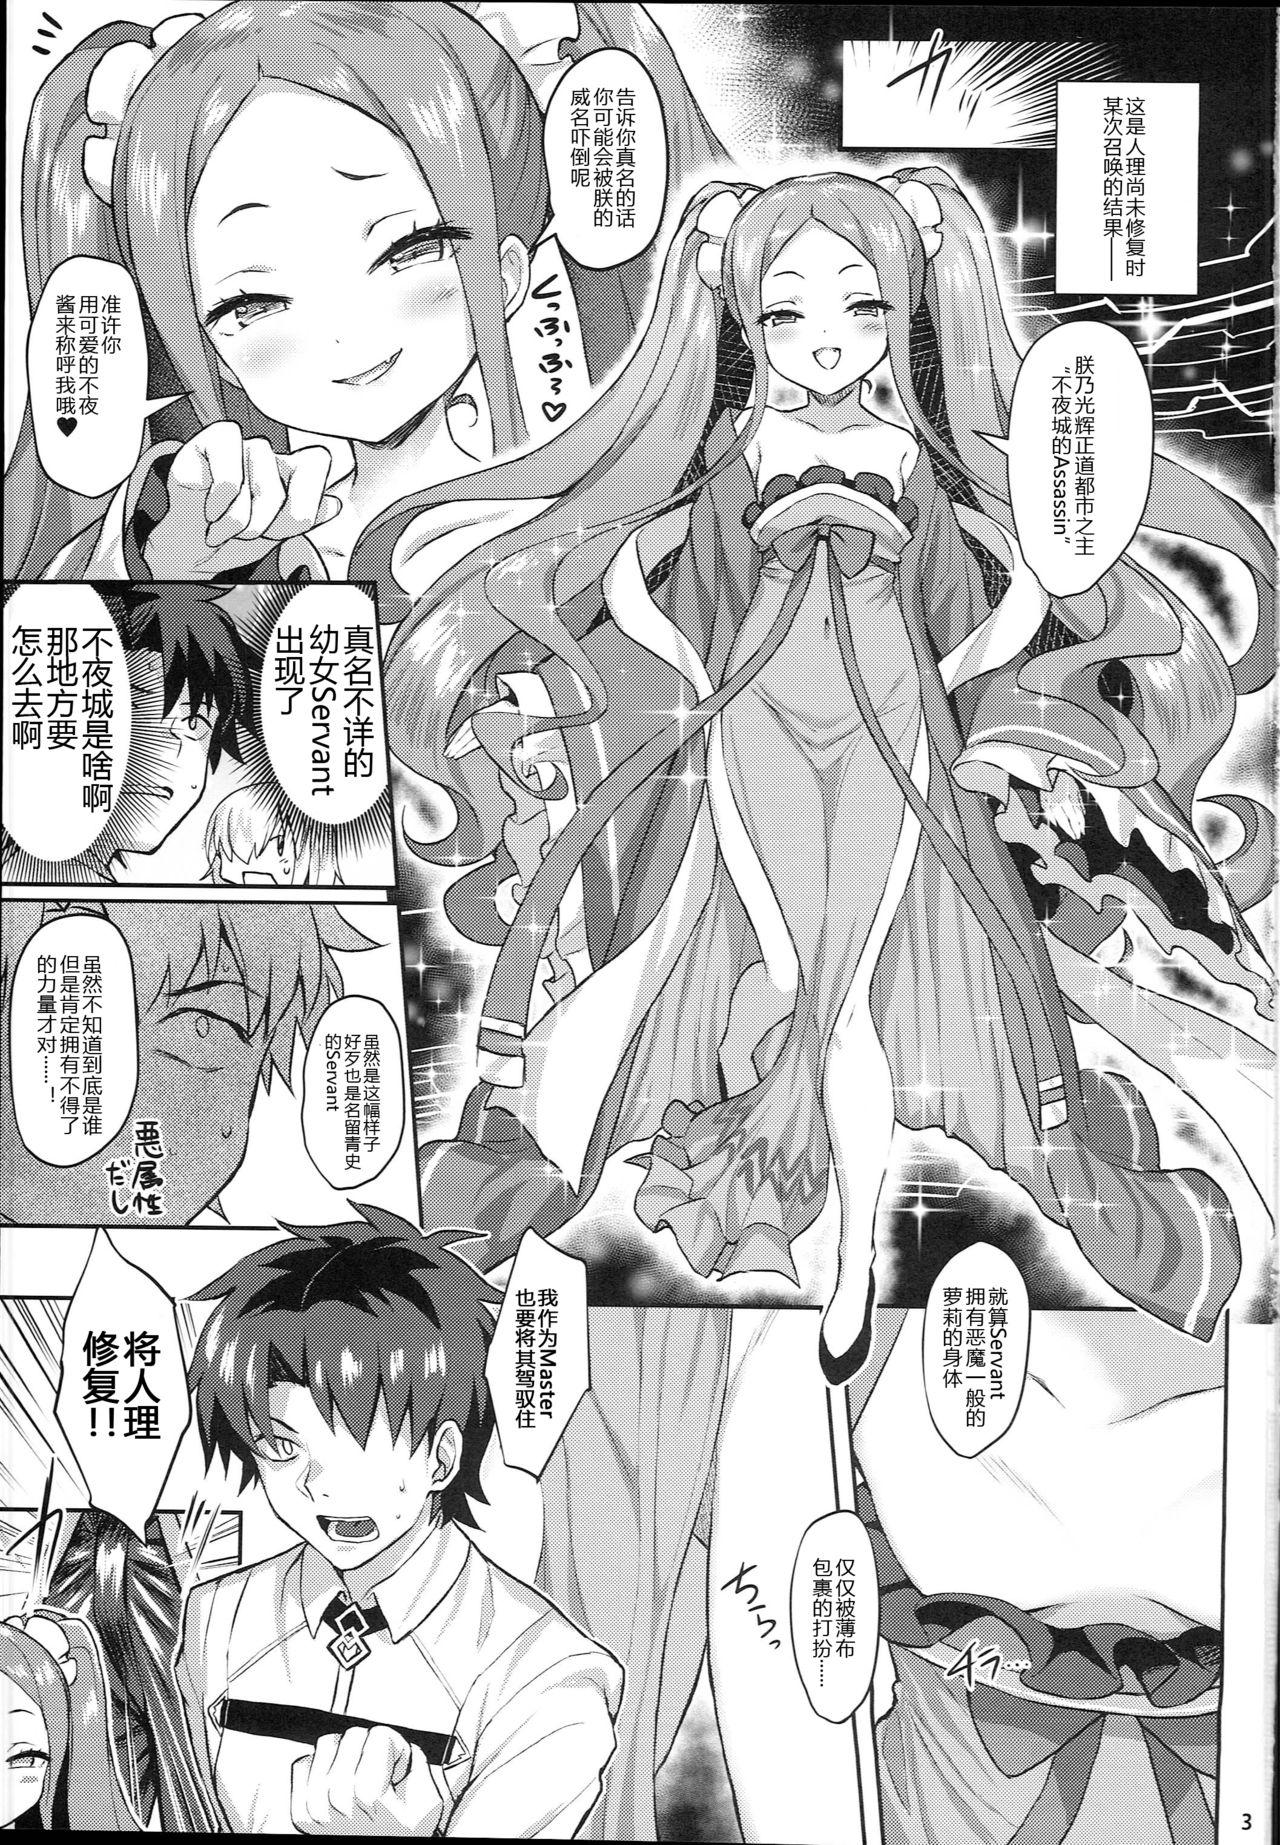 Fuck For Money Fuya Syndrome - Sleepless Syndrome - Fate grand order Brasileira - Page 4